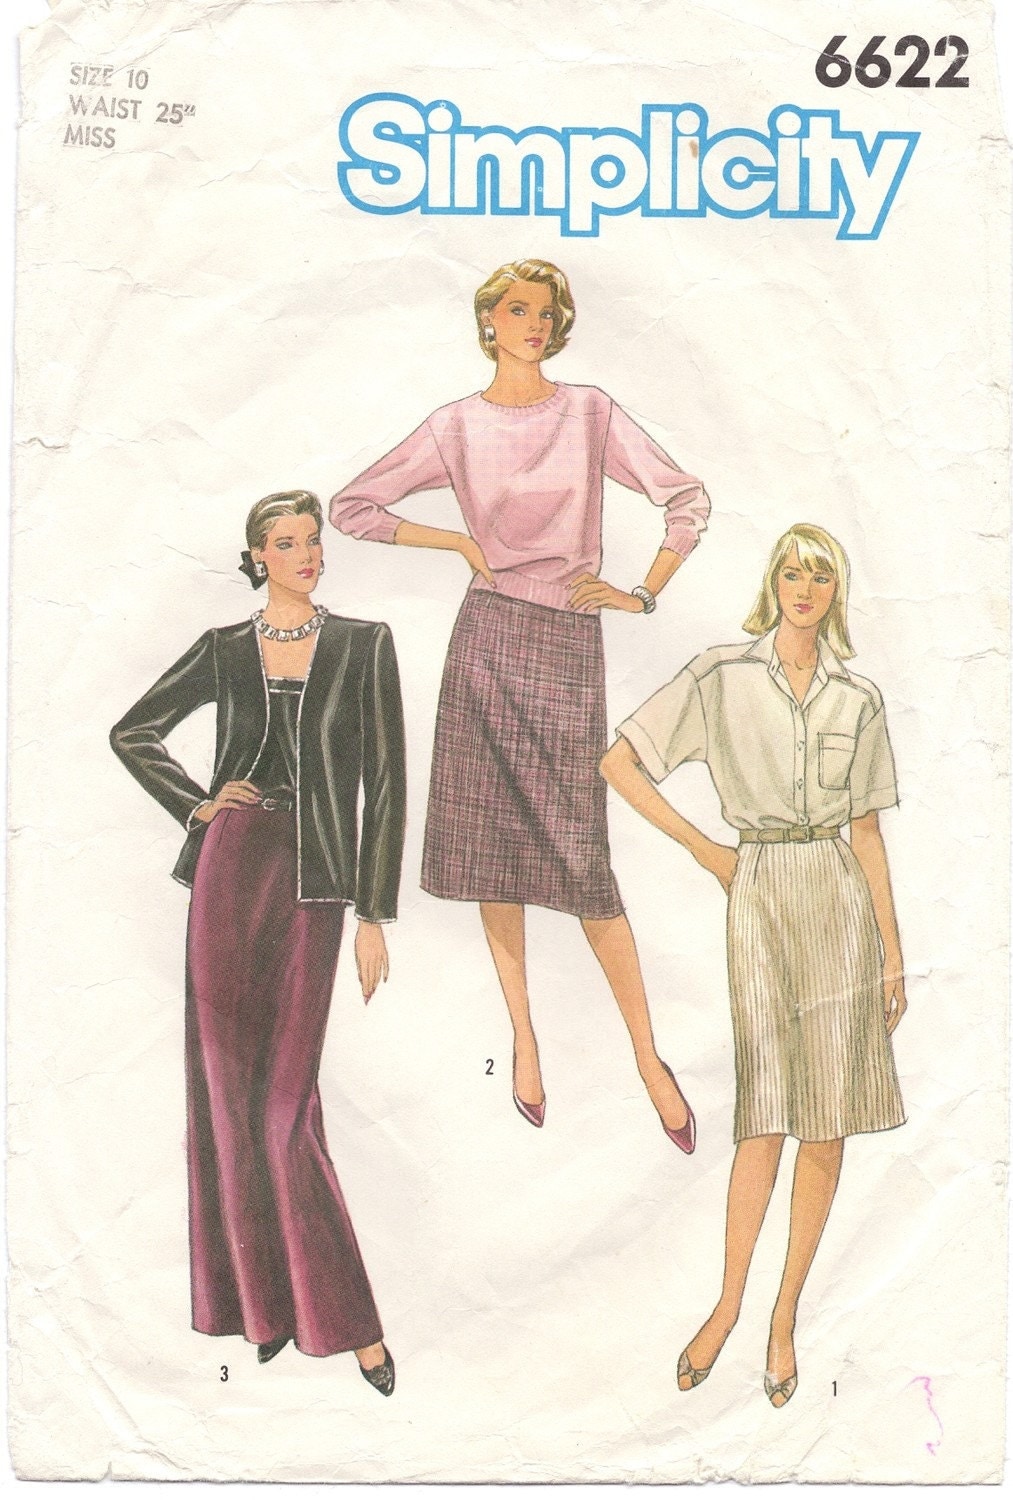 1980s Sewing Pattern Vintage Sewing Pattern 80s Skirt